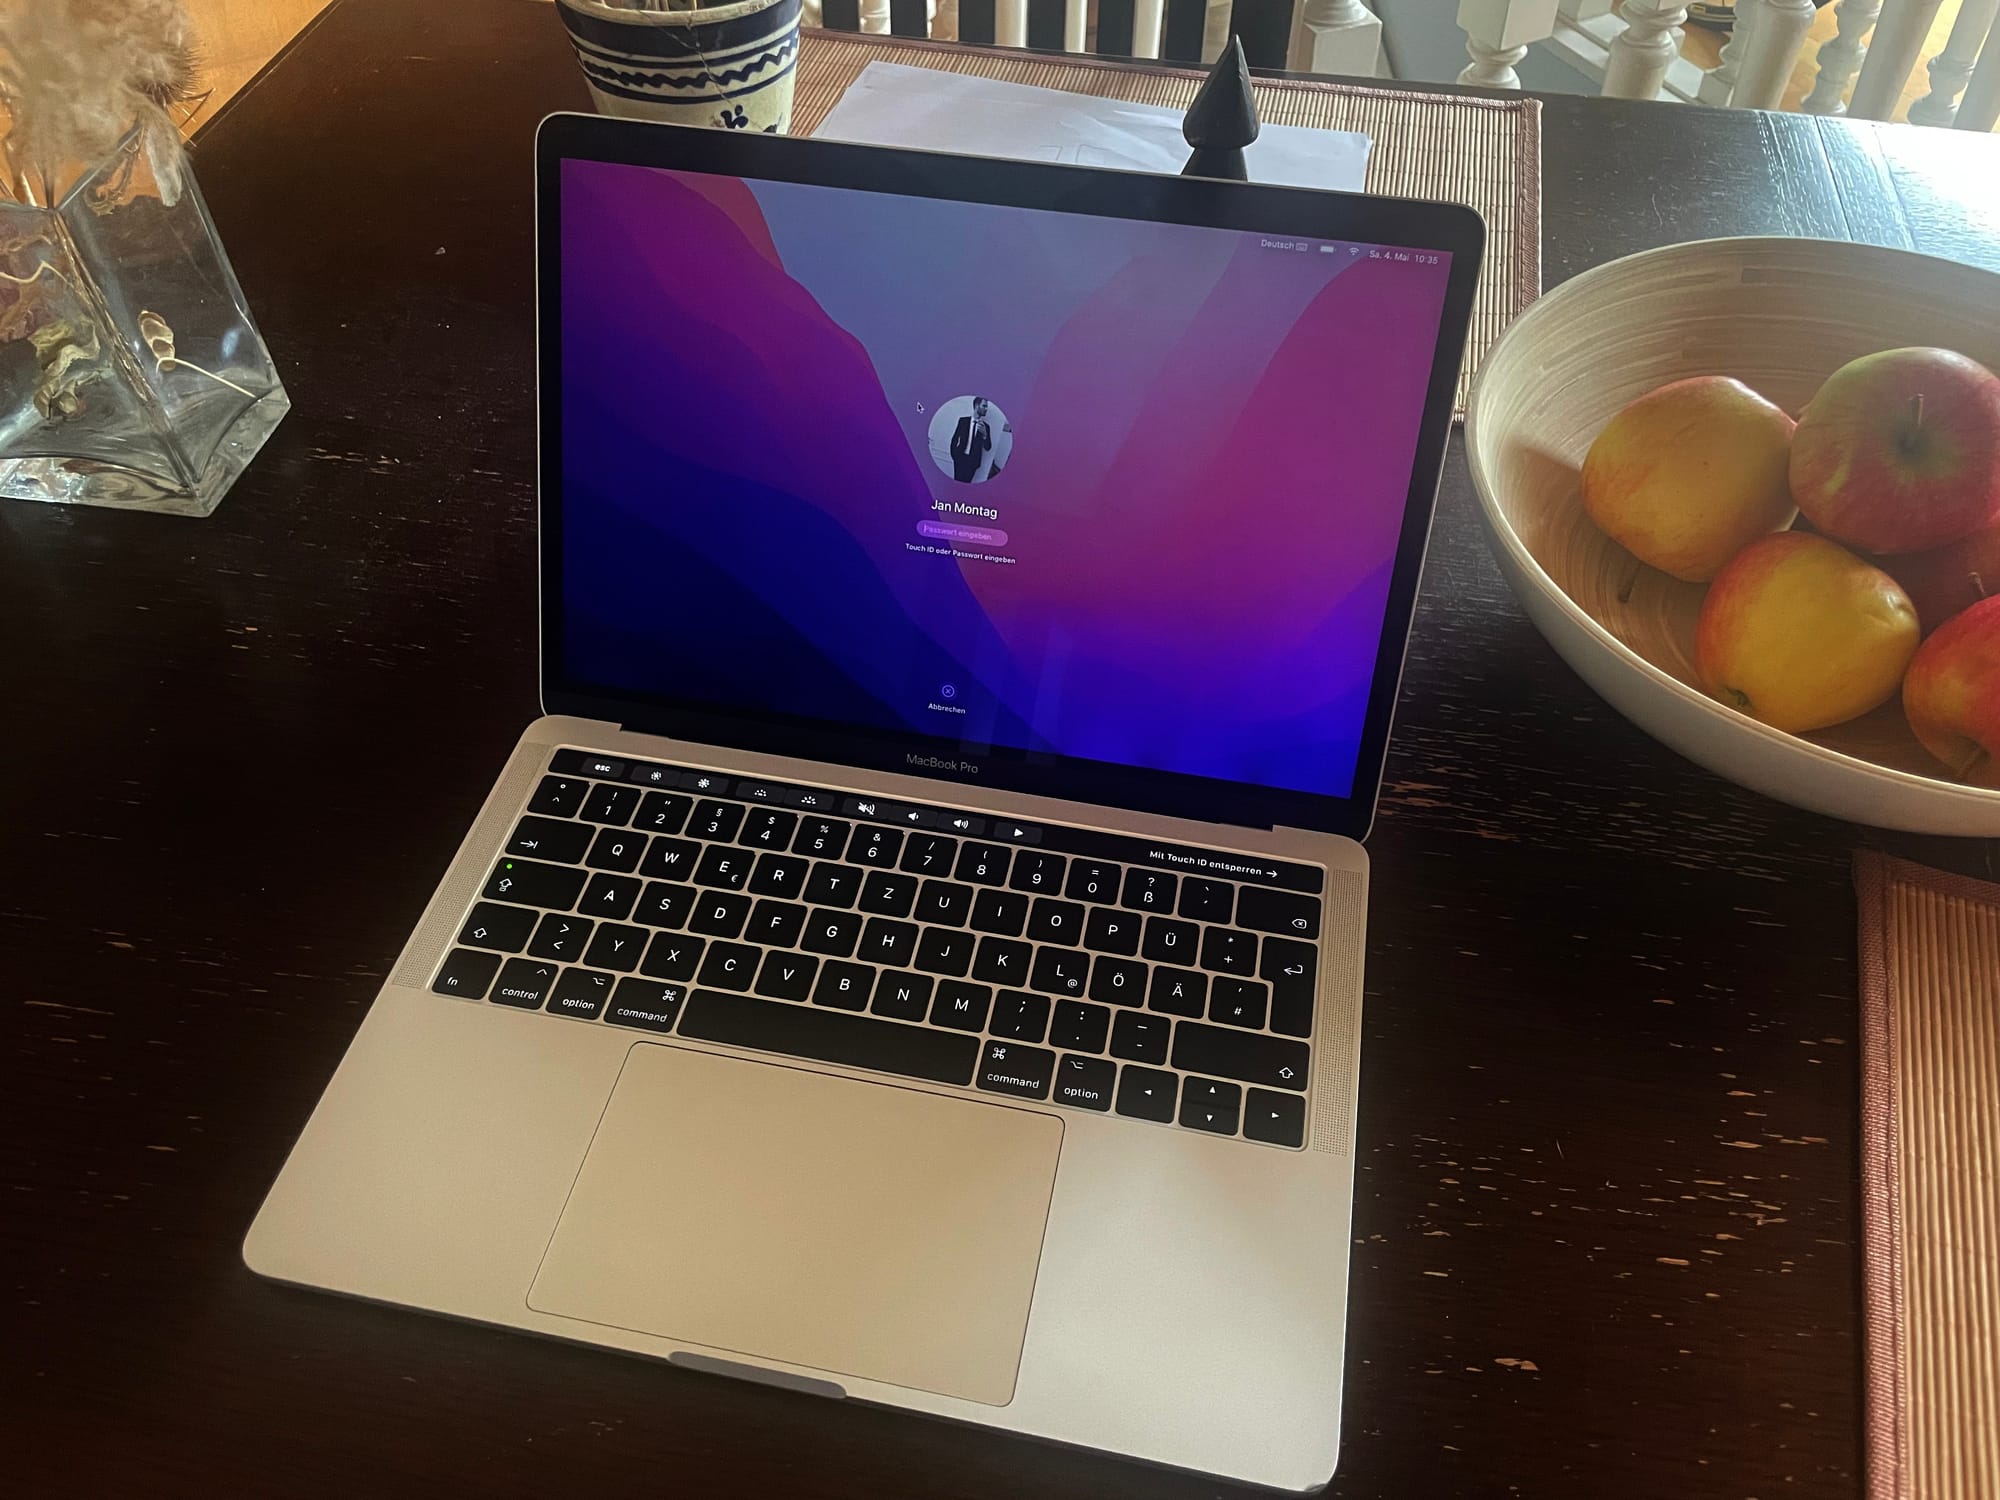 MacBook Pro 13" 2016 (4 TB 3, Touch Bar) on a brown table (C) Herr Montag